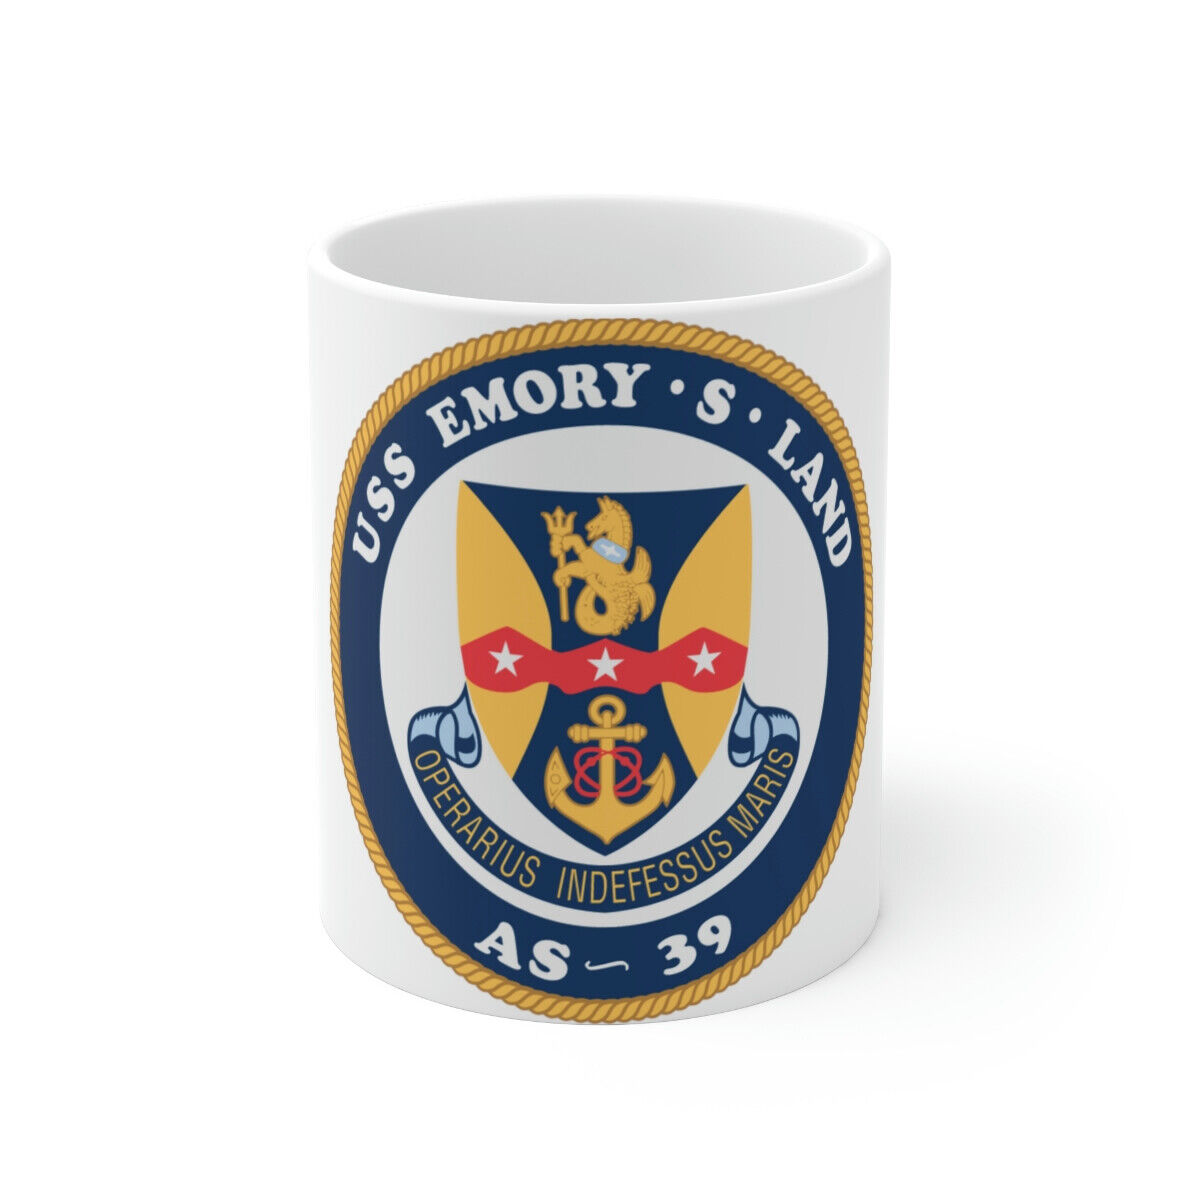 USS Emory S Land AS 39 (U.S. Navy) White Coffee Cup 11oz